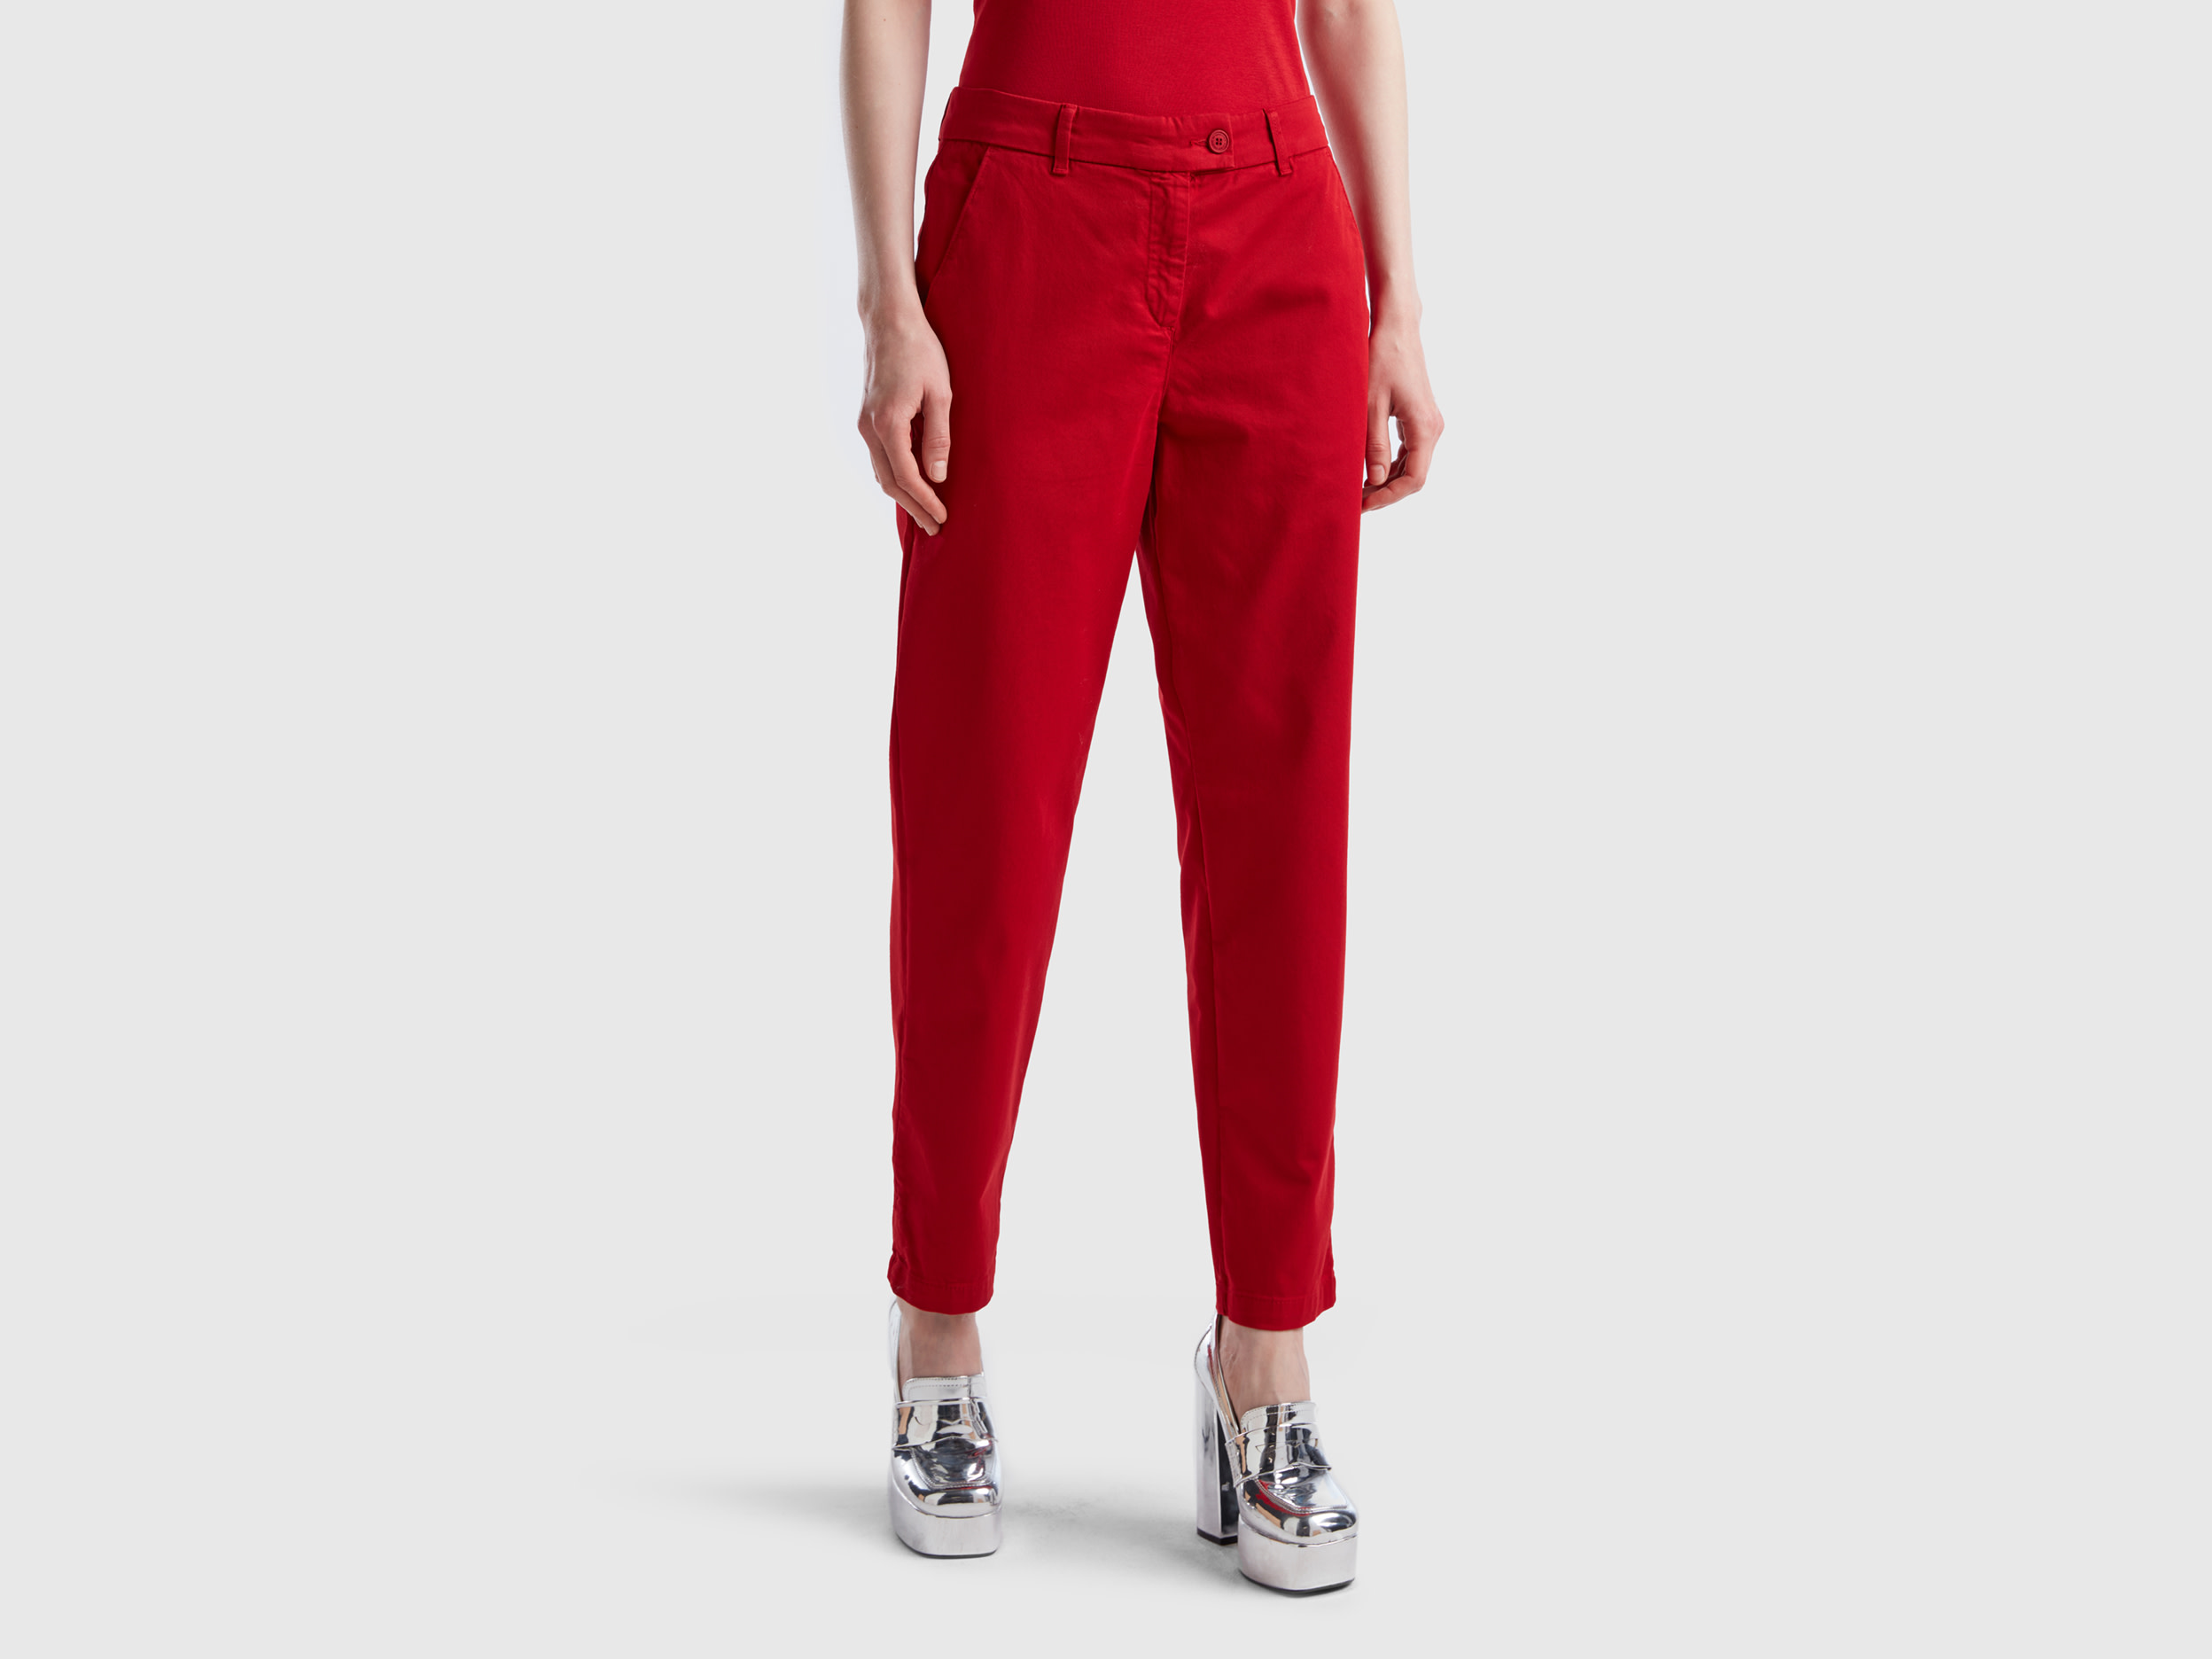 Benetton, Stretch Cotton Chino Trousers, size 16, Red, Women